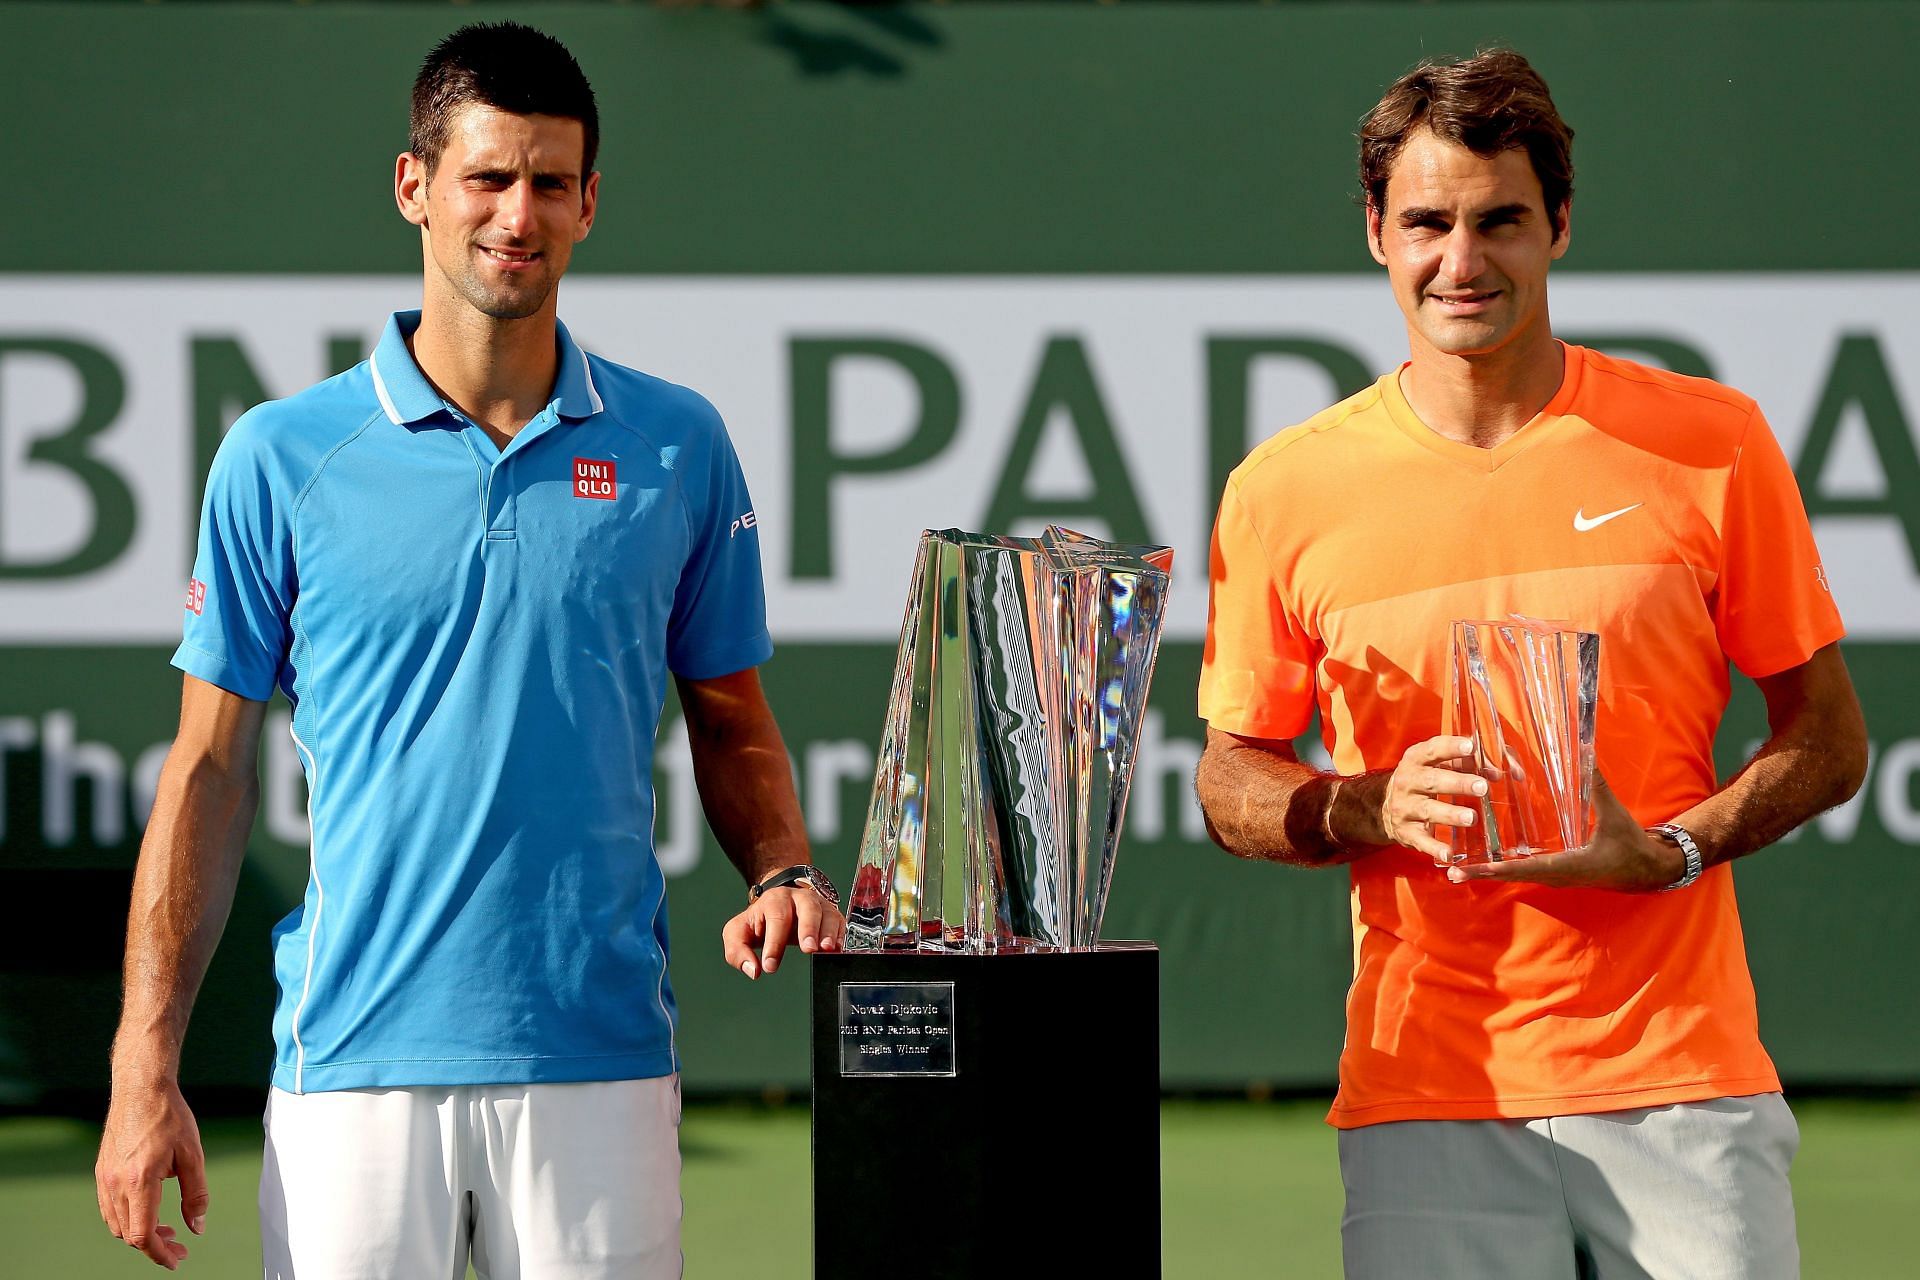 Both Novak Djokovic and Roger Federer have five Indian Wells titles to his name.